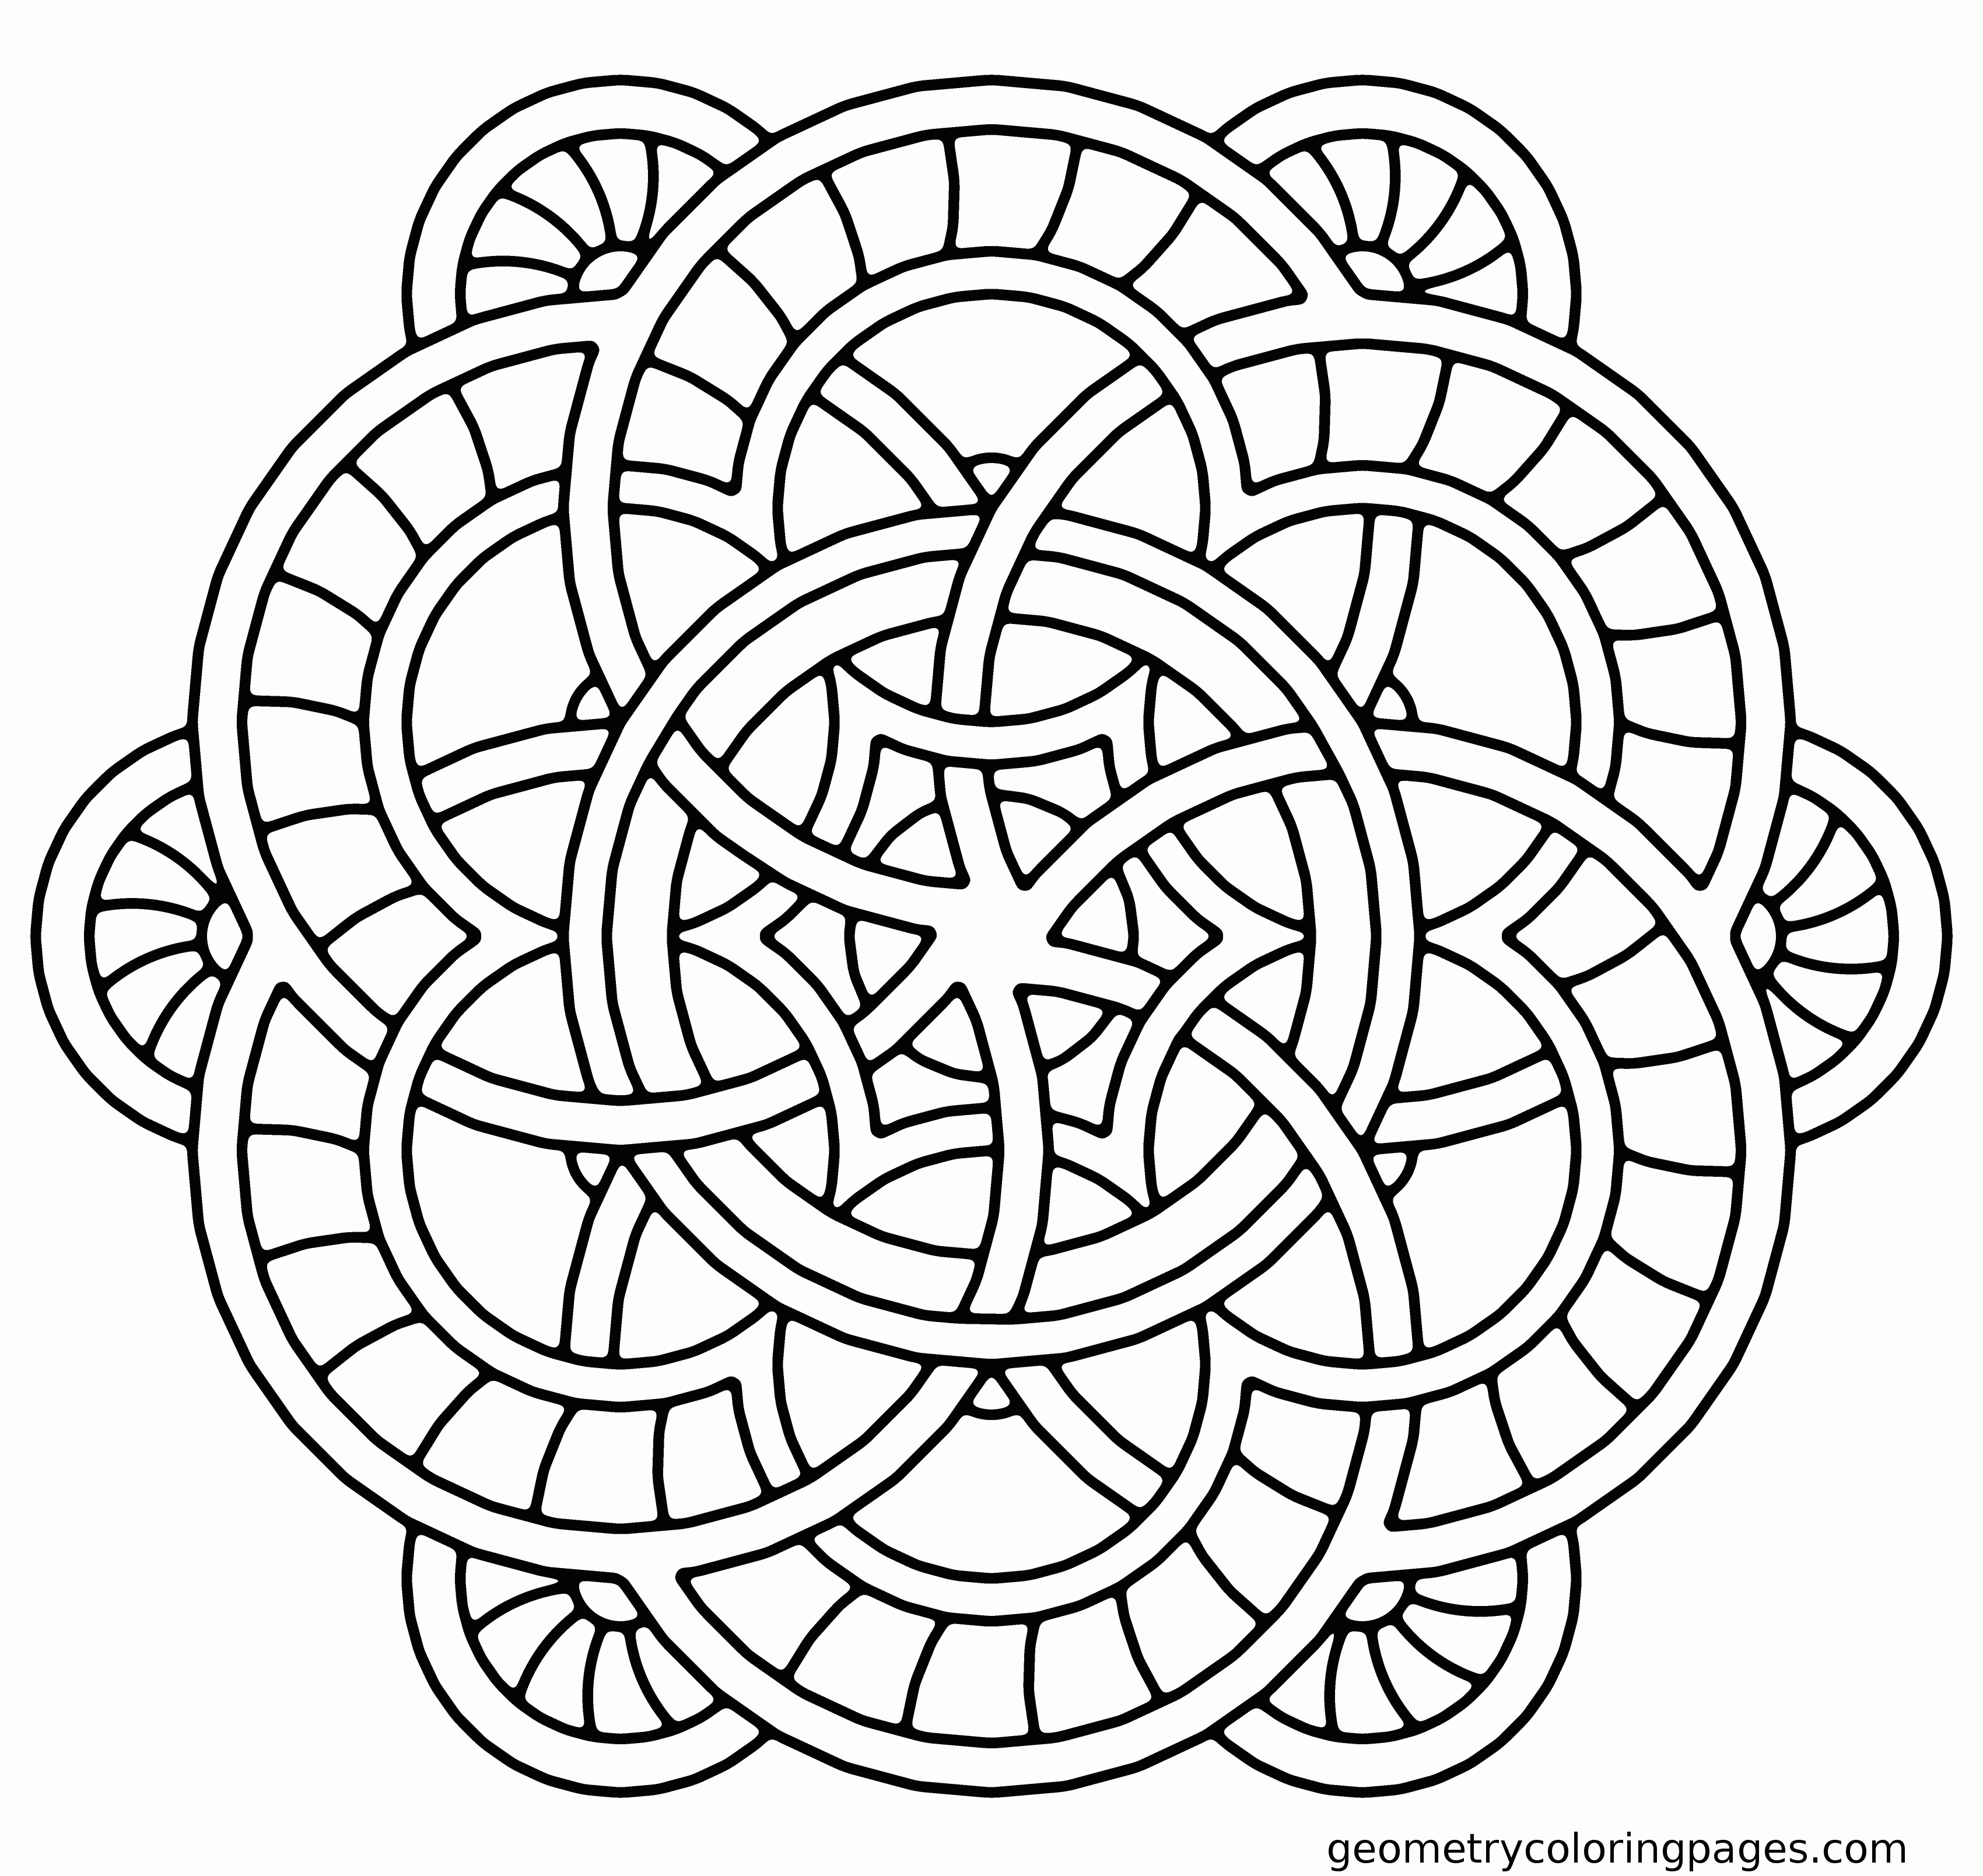 easy mandala colouring pages - Clip Art Library